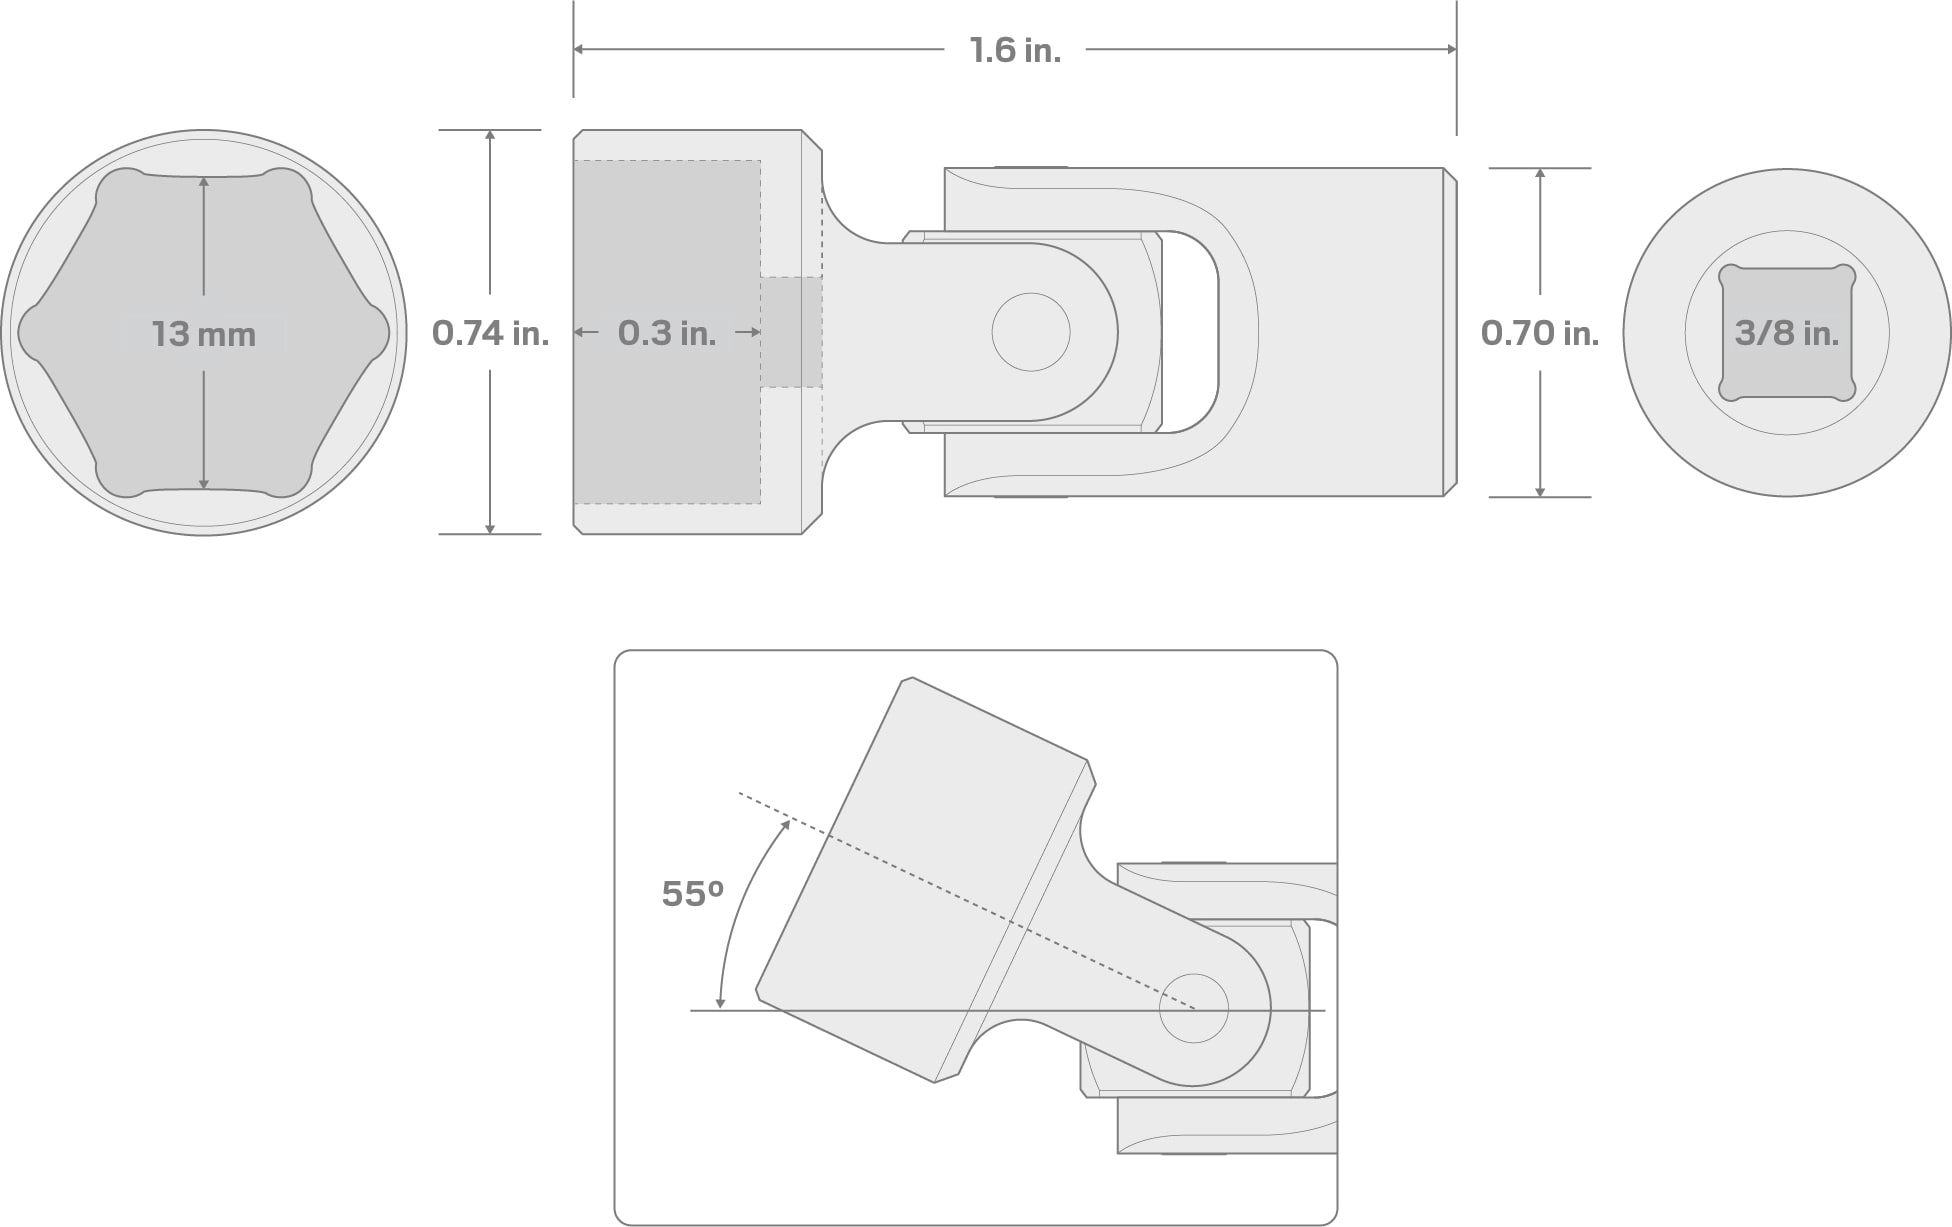 Specs for 3/8 Inch Drive x 13 mm Universal Joint Socket